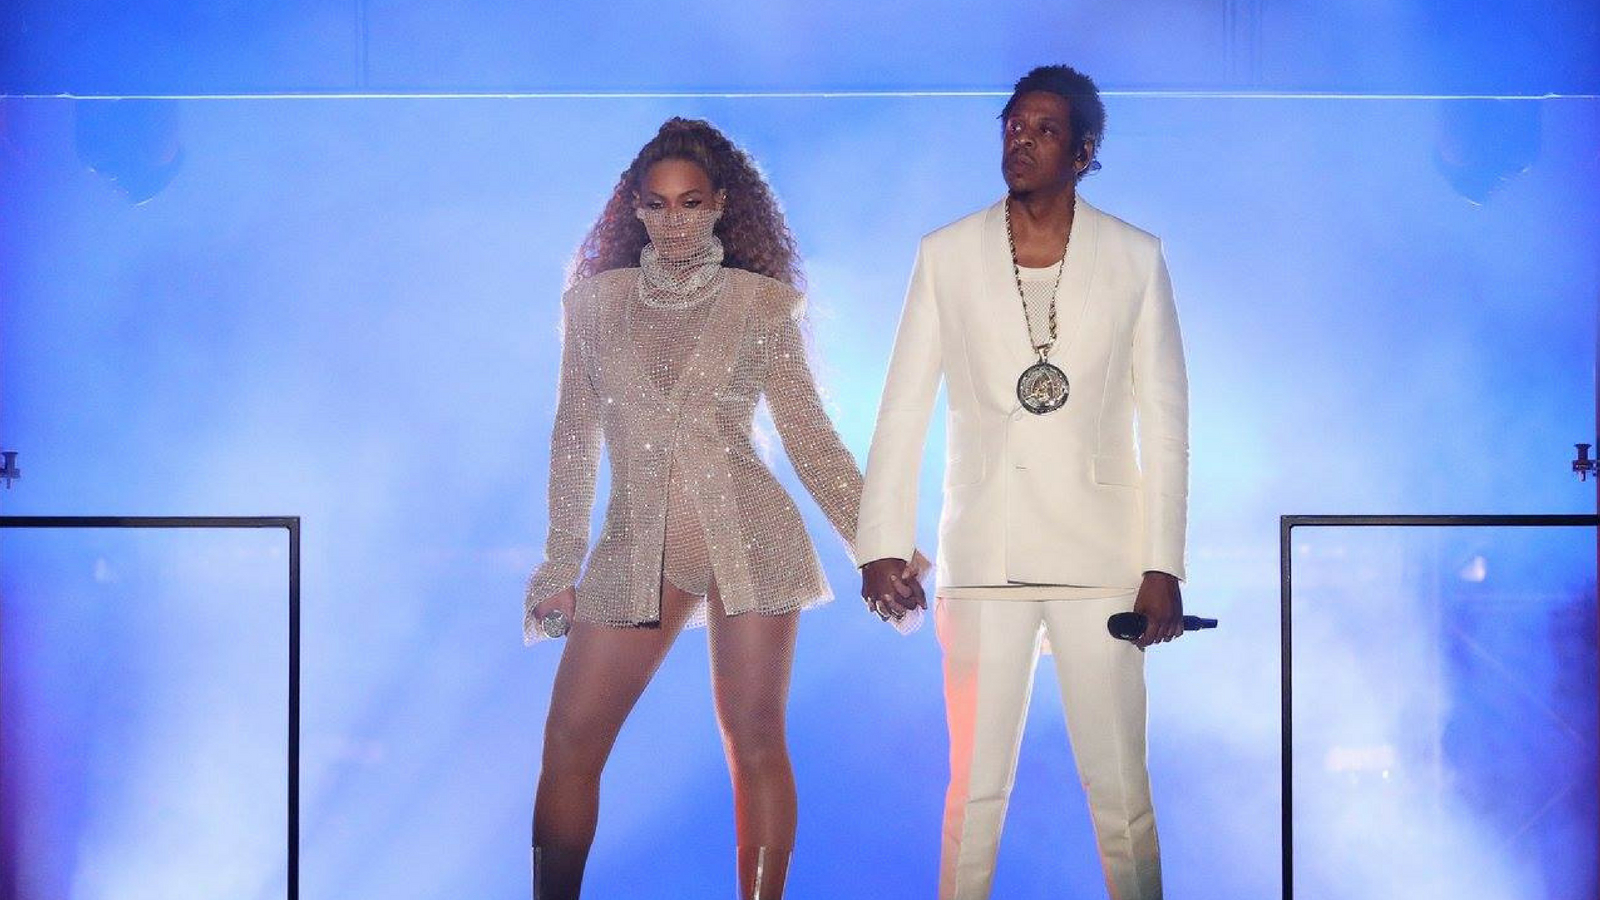 Beyoncé and Jay Z at their concert in Cardiff, England on June 6, 2018. Photo via Facebook